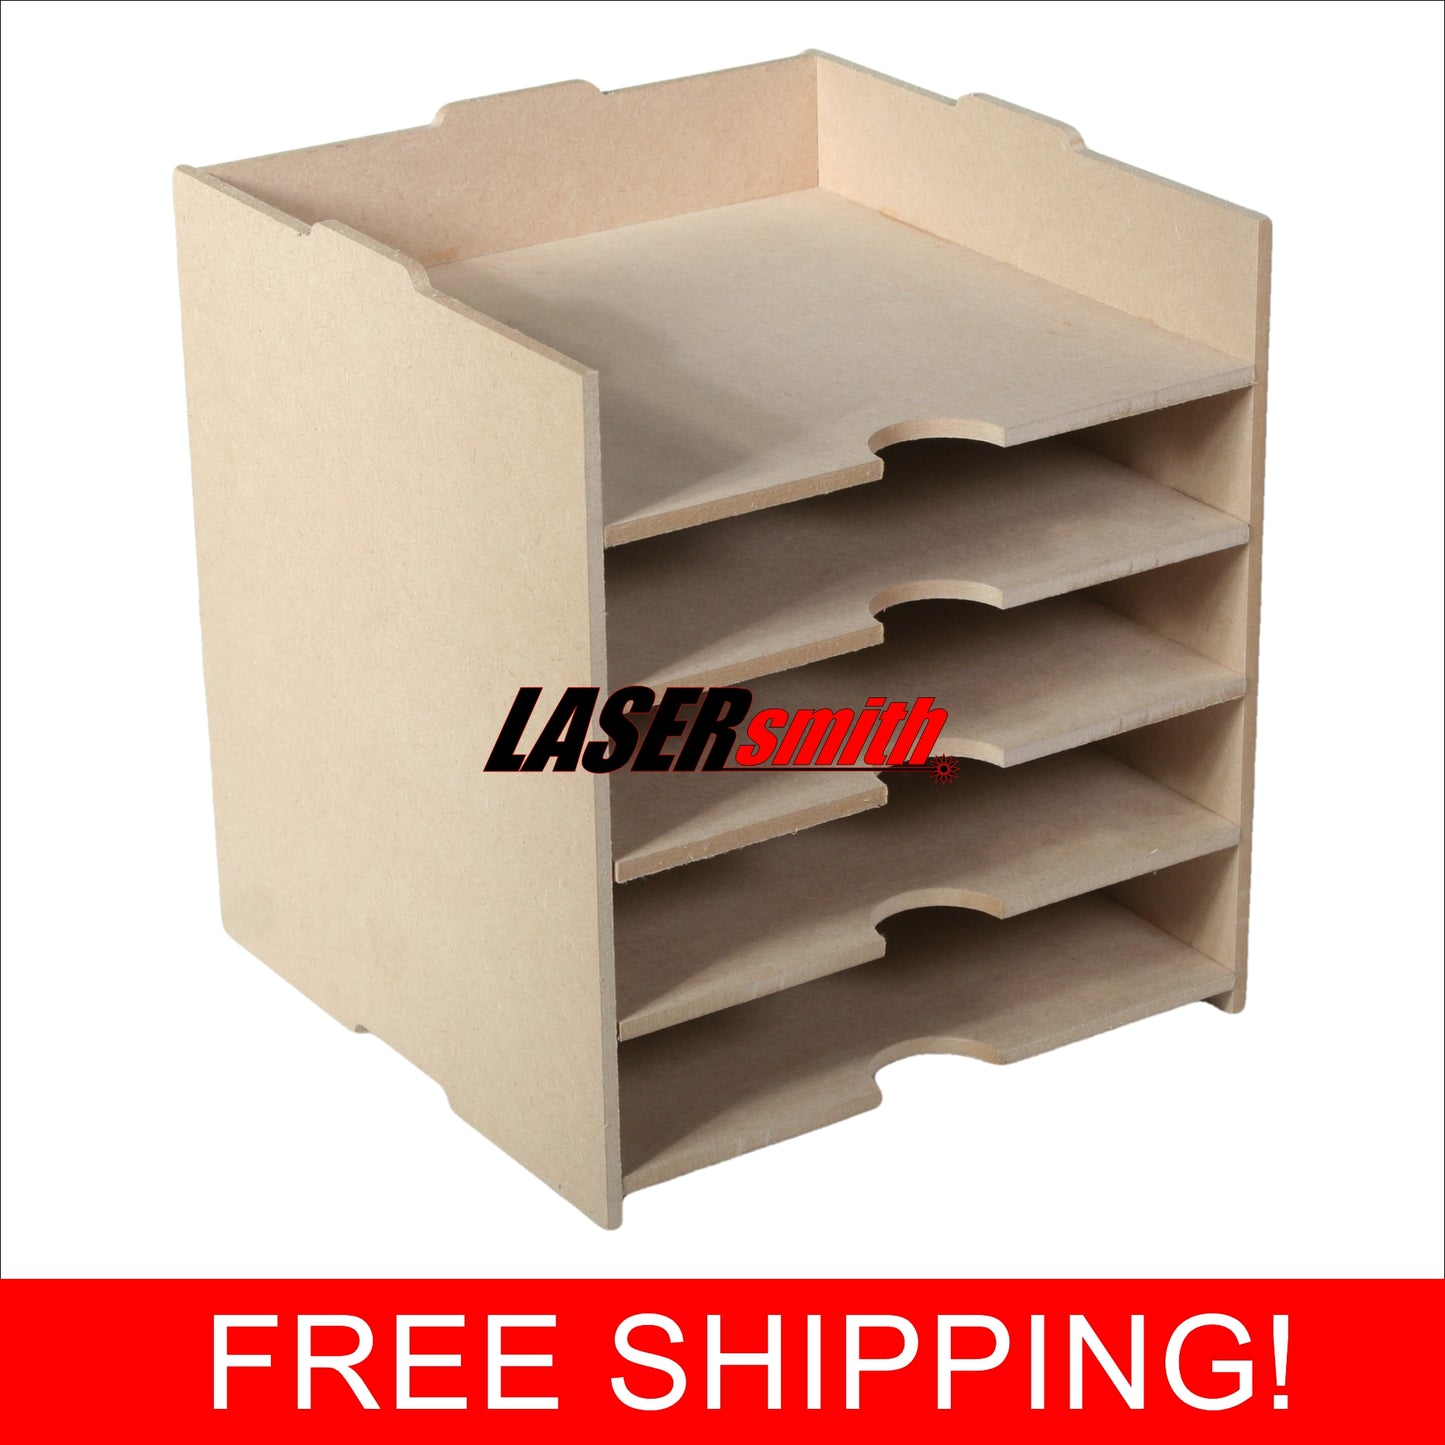 STORAGE FOR 8 X 8" PLASTIC STORAGE CONTAINERS FOR CRAFTING AND OFFICE USE